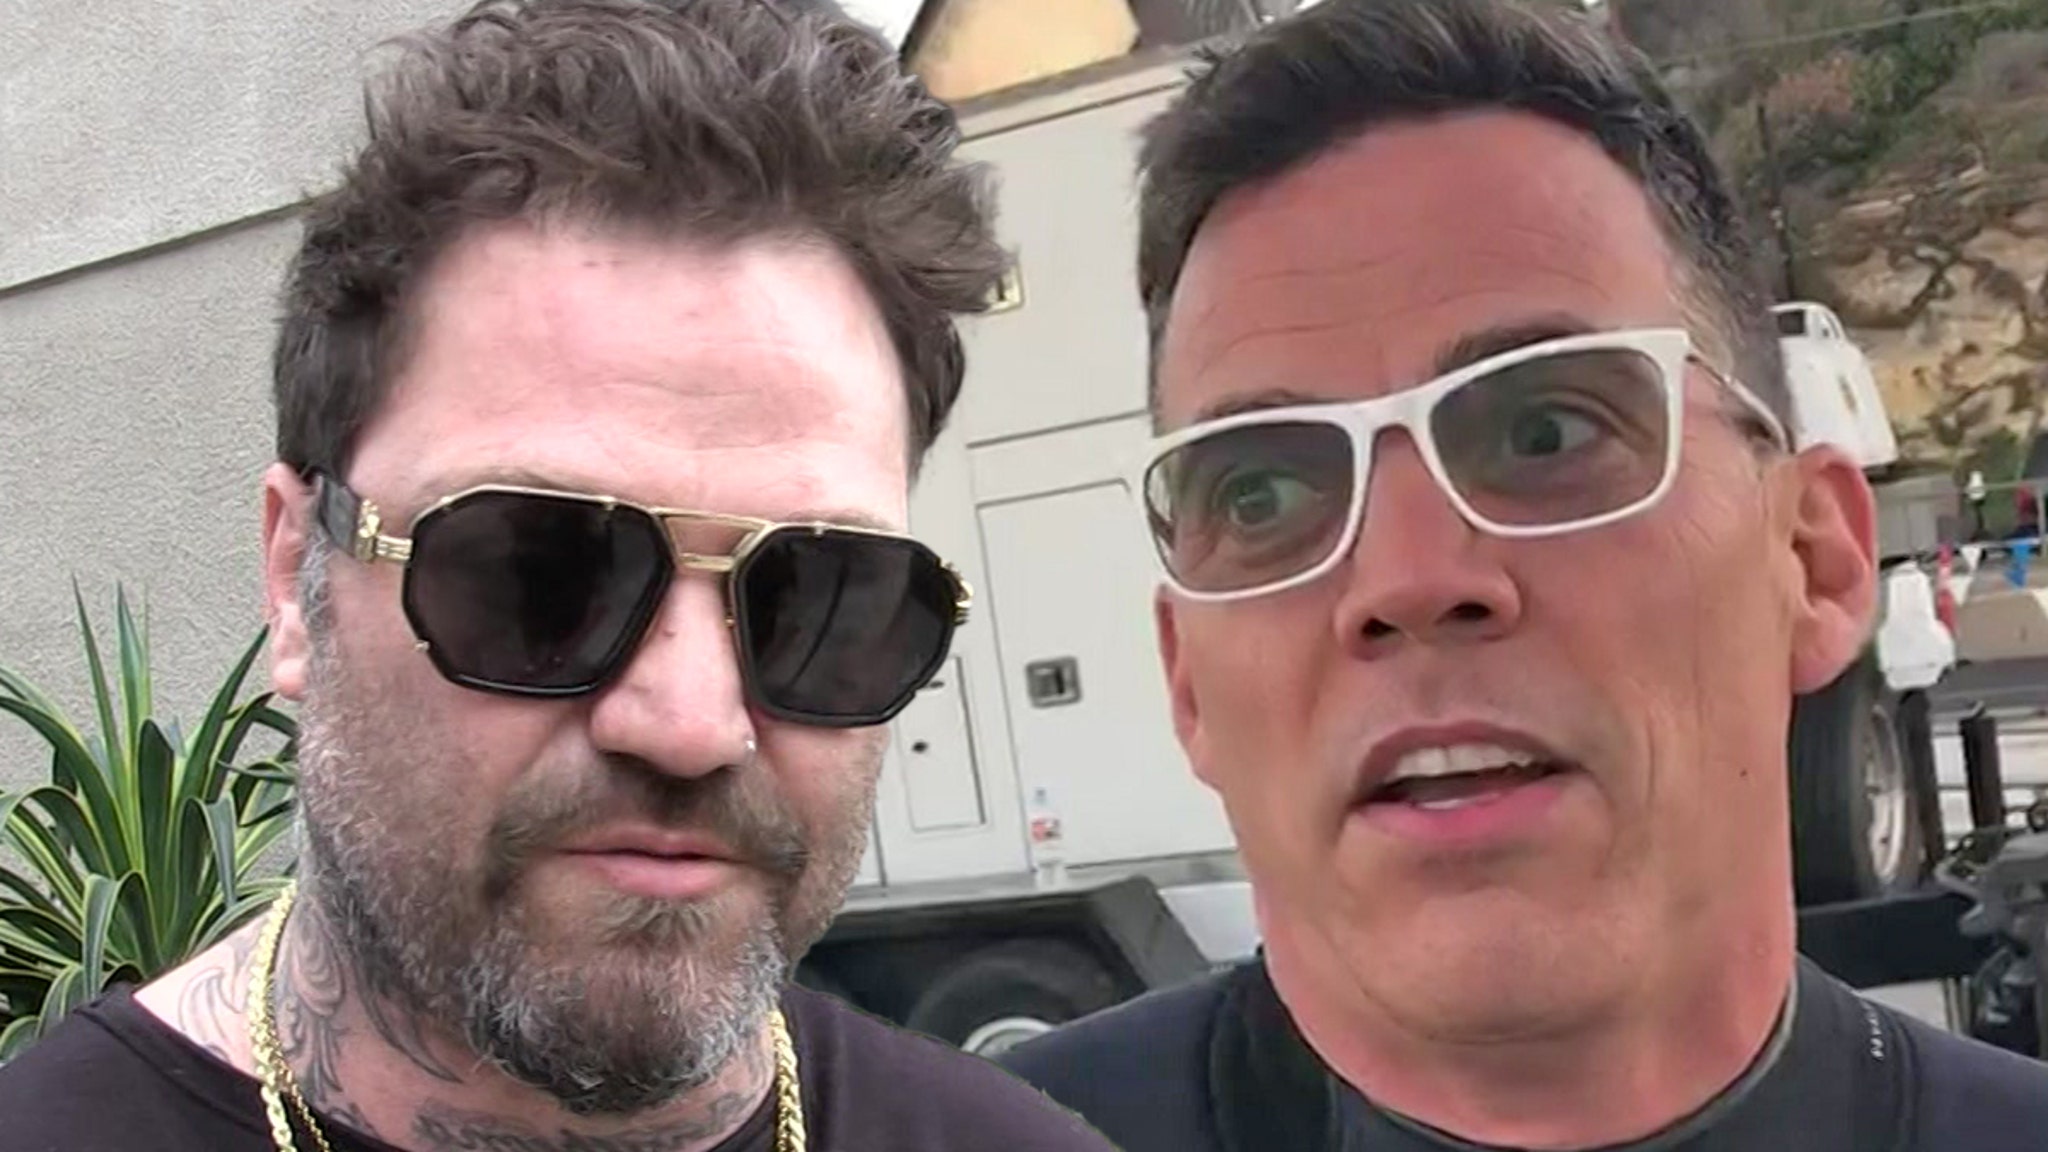 Steve-O Ready for Bam Margera’s Death Has Tried Everything for Sobriety – TMZ